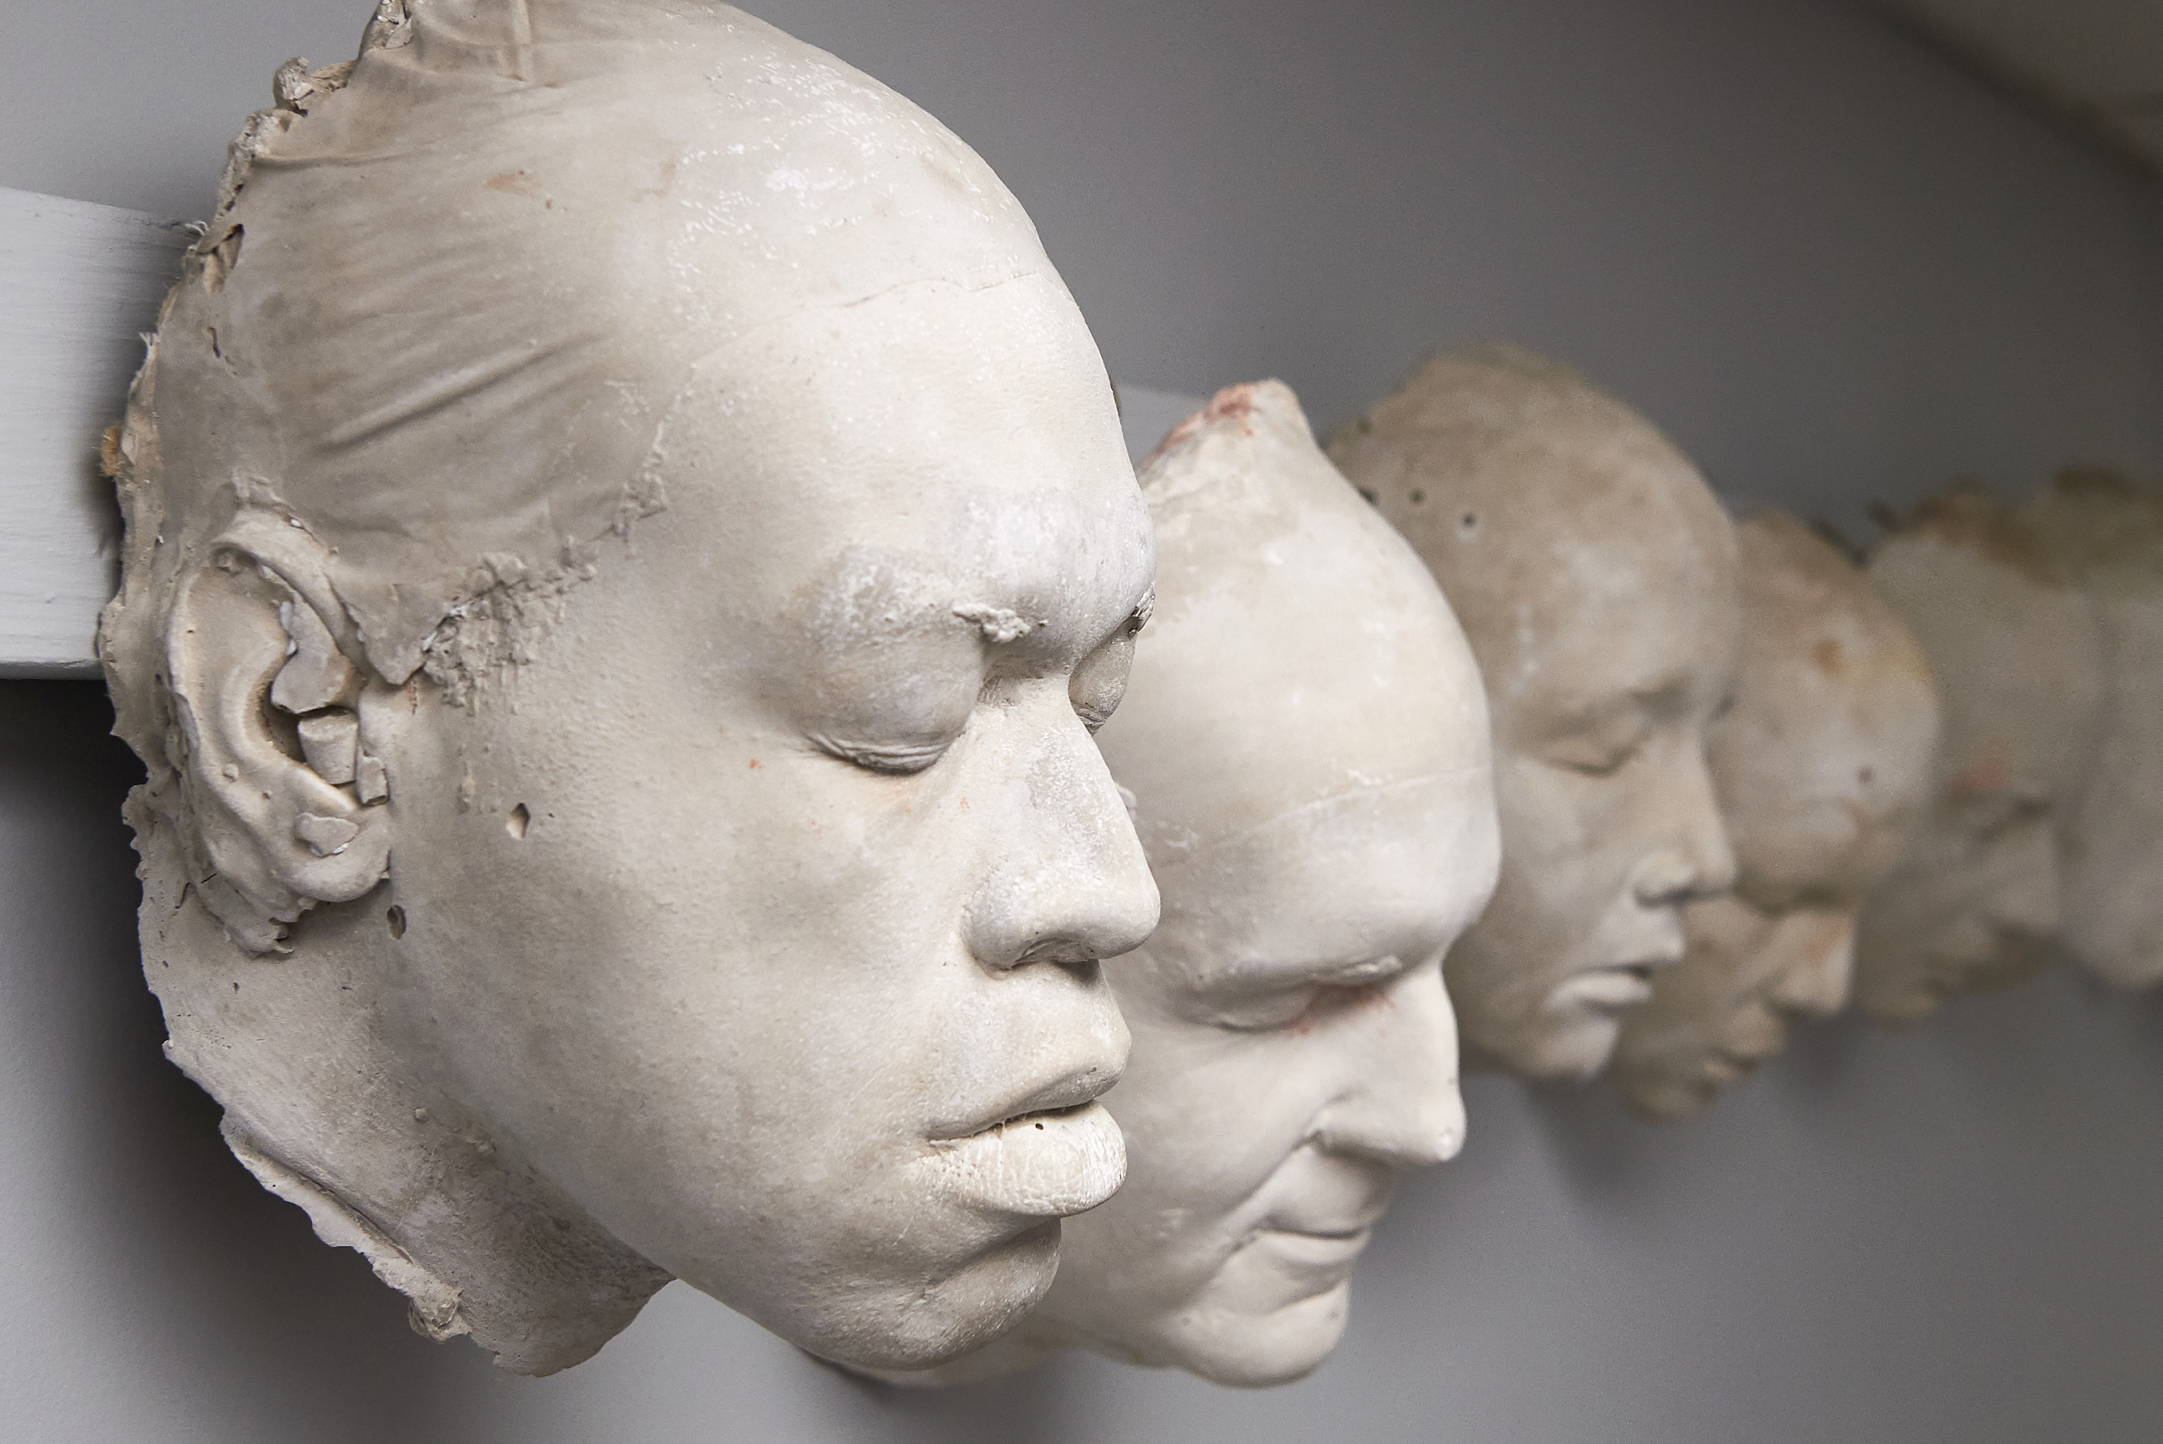 A row of plaster cast heads is among 27 campus treasures and oddities for you to identify. (Peter Morenus/UConn Photo)